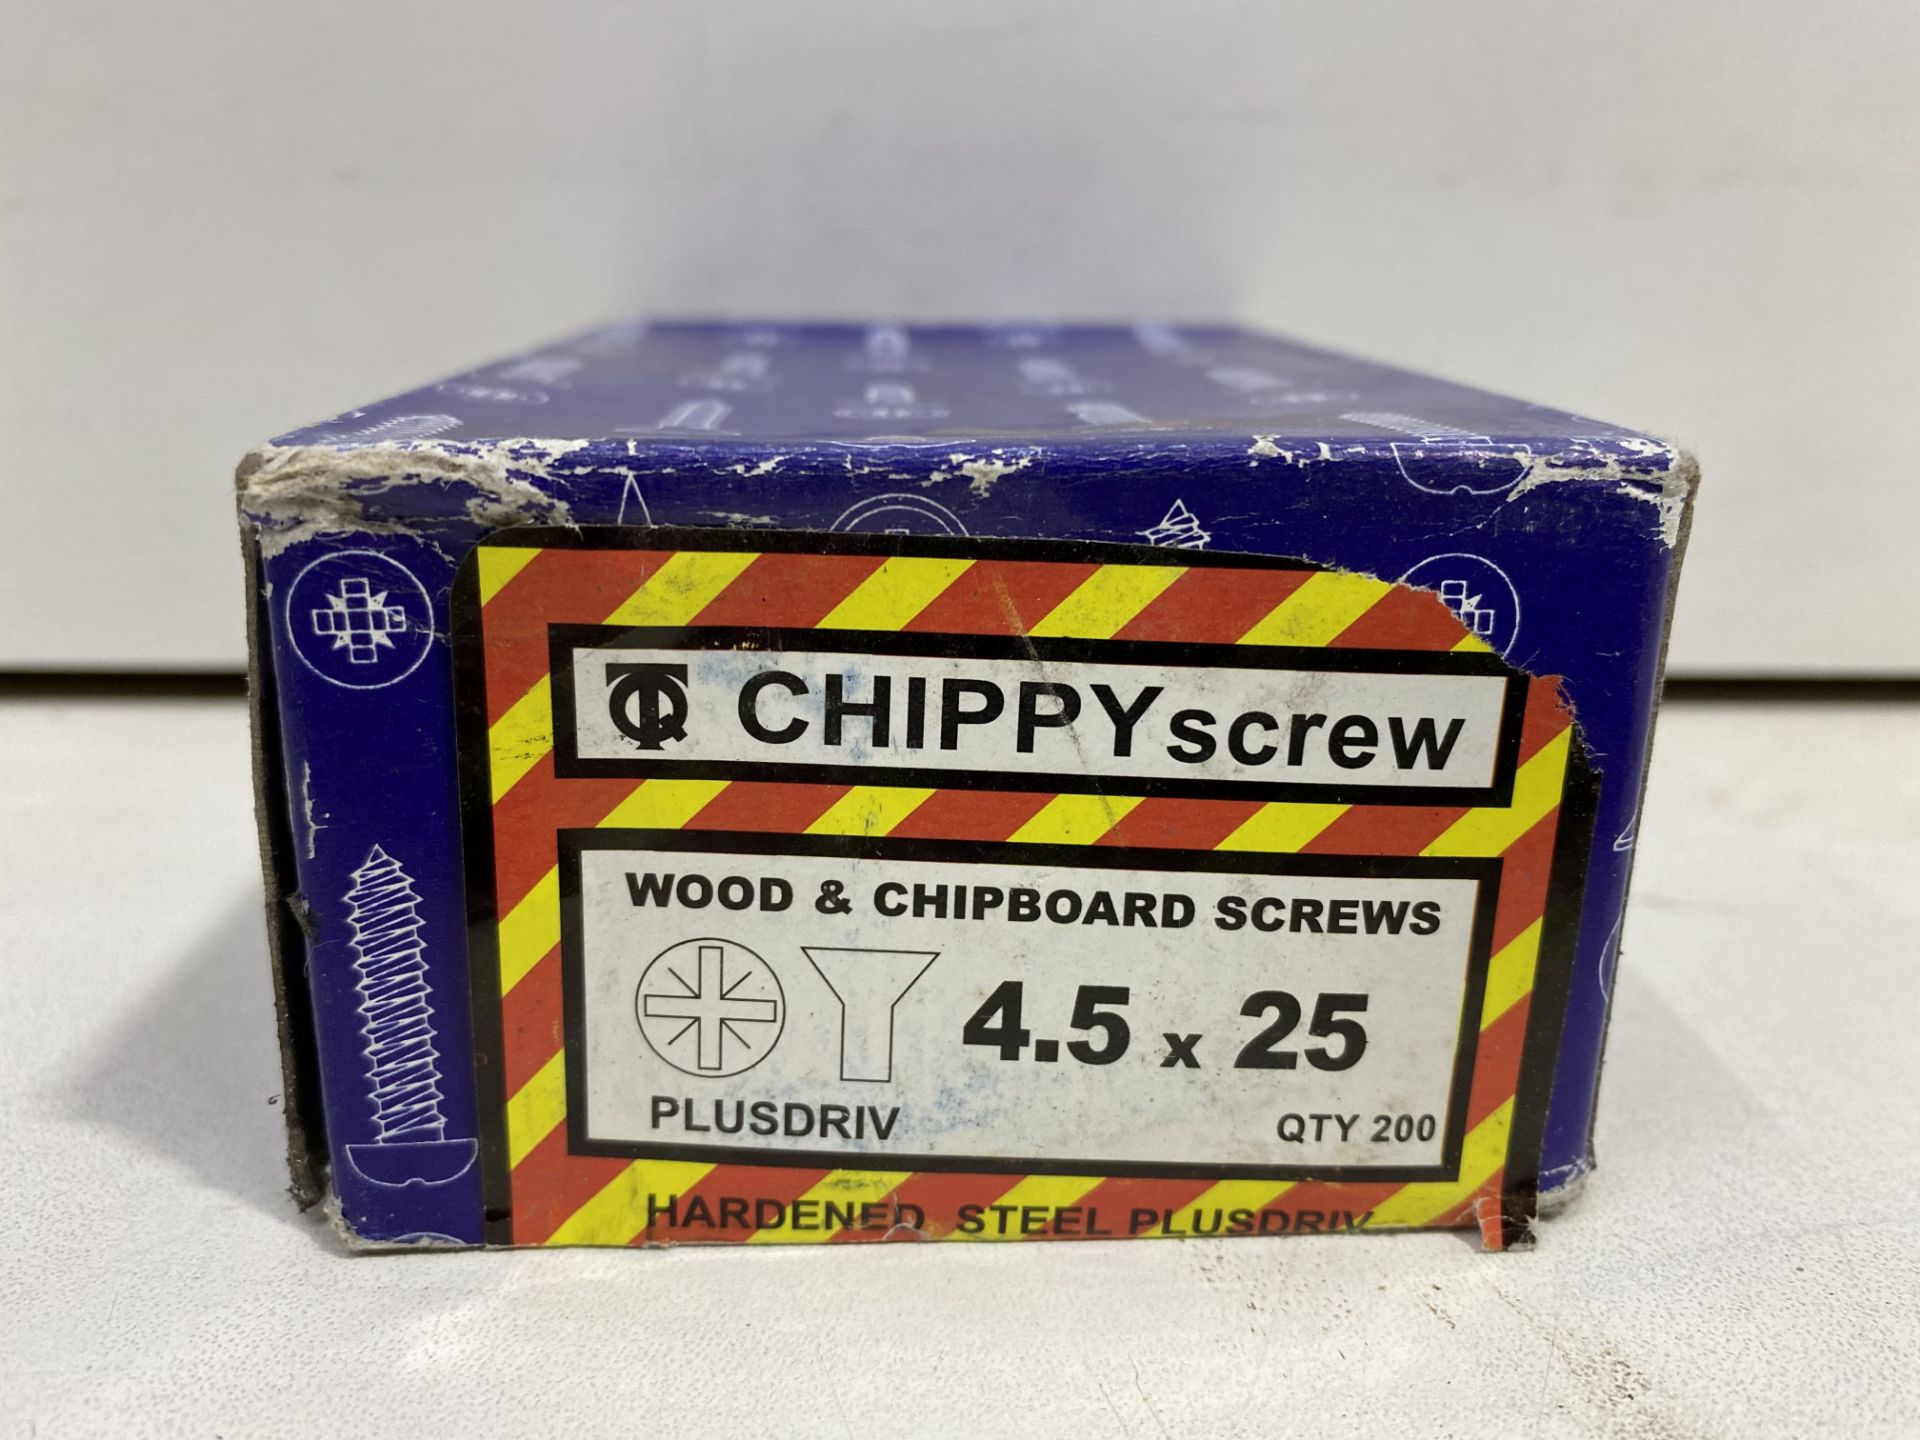 8 x Various Boxes Of Chippy Screw Wood & Chipboard Screws - Image 8 of 9